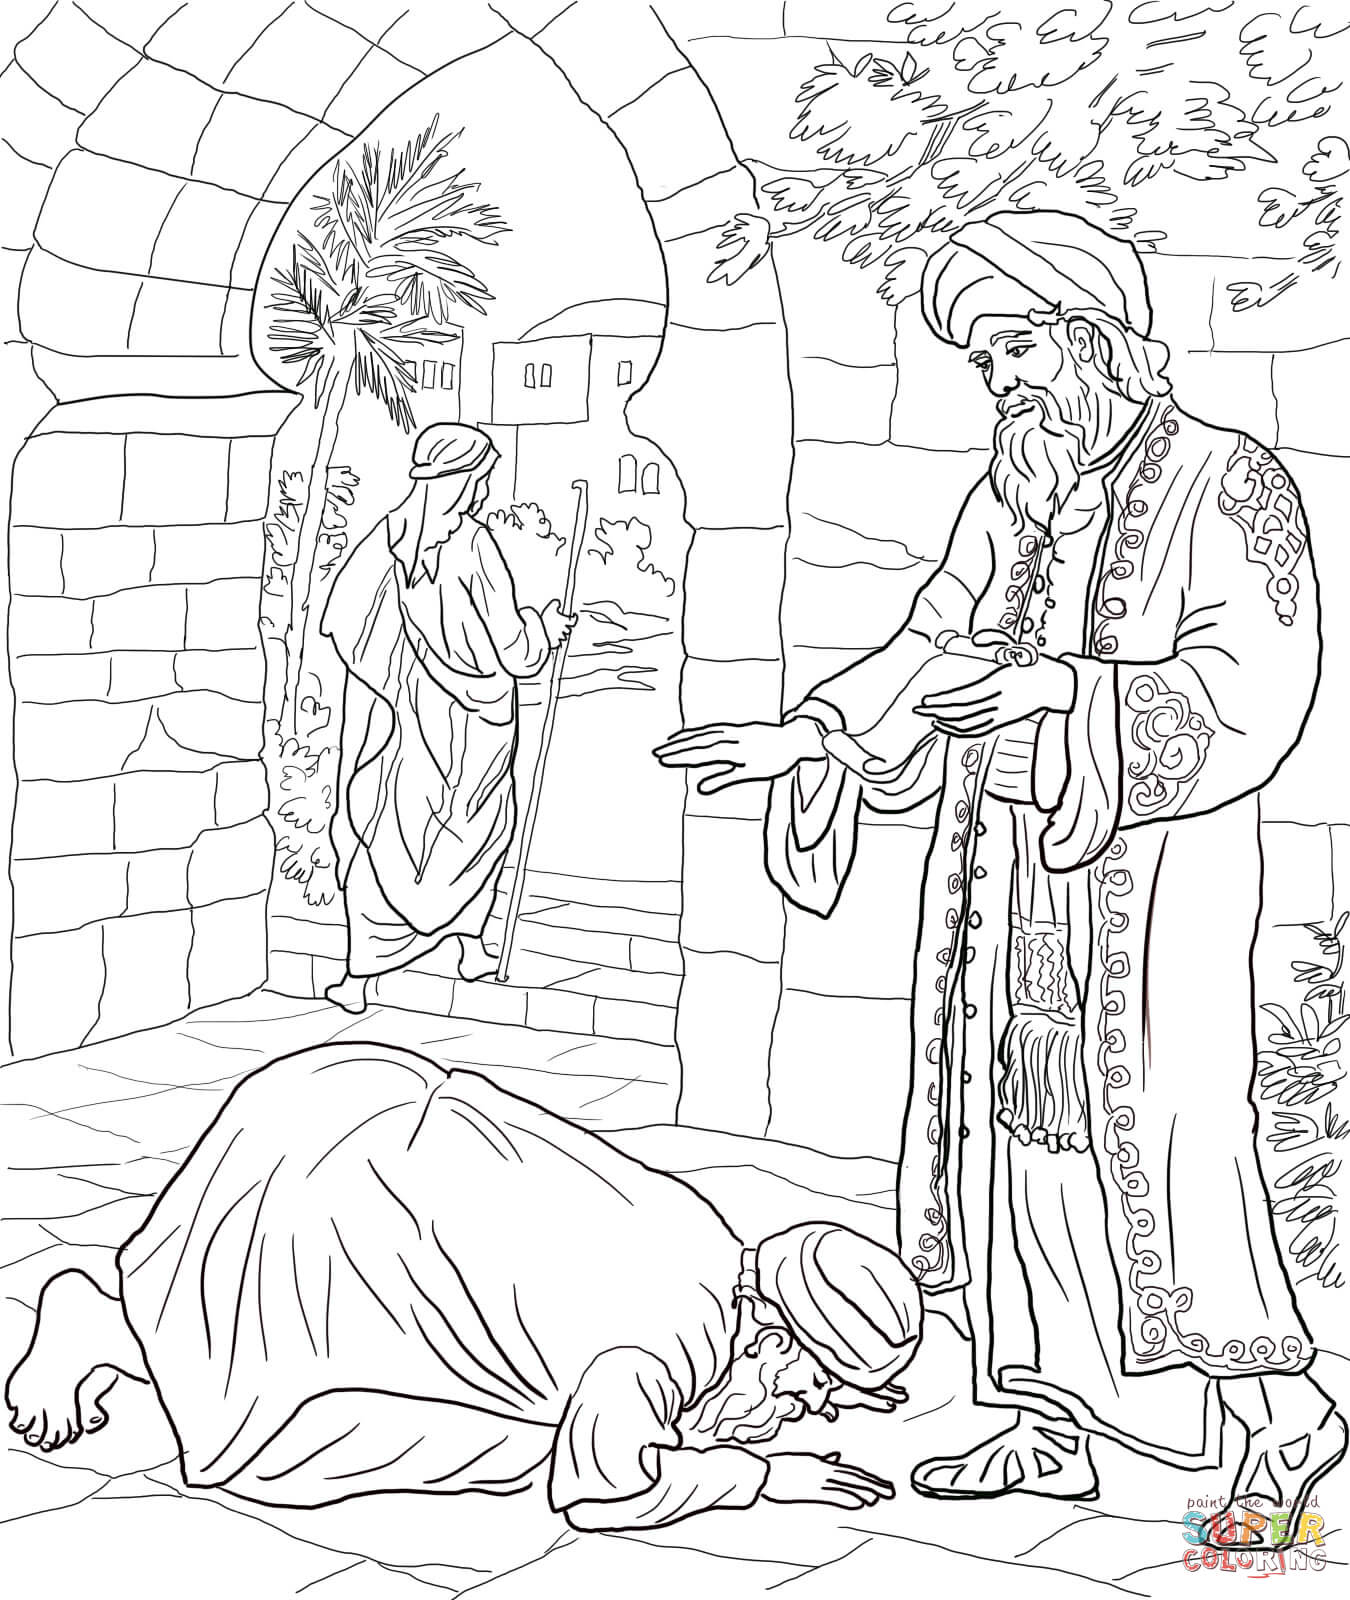 Parable of the Two Debtors coloring page | Free Printable Coloring ...